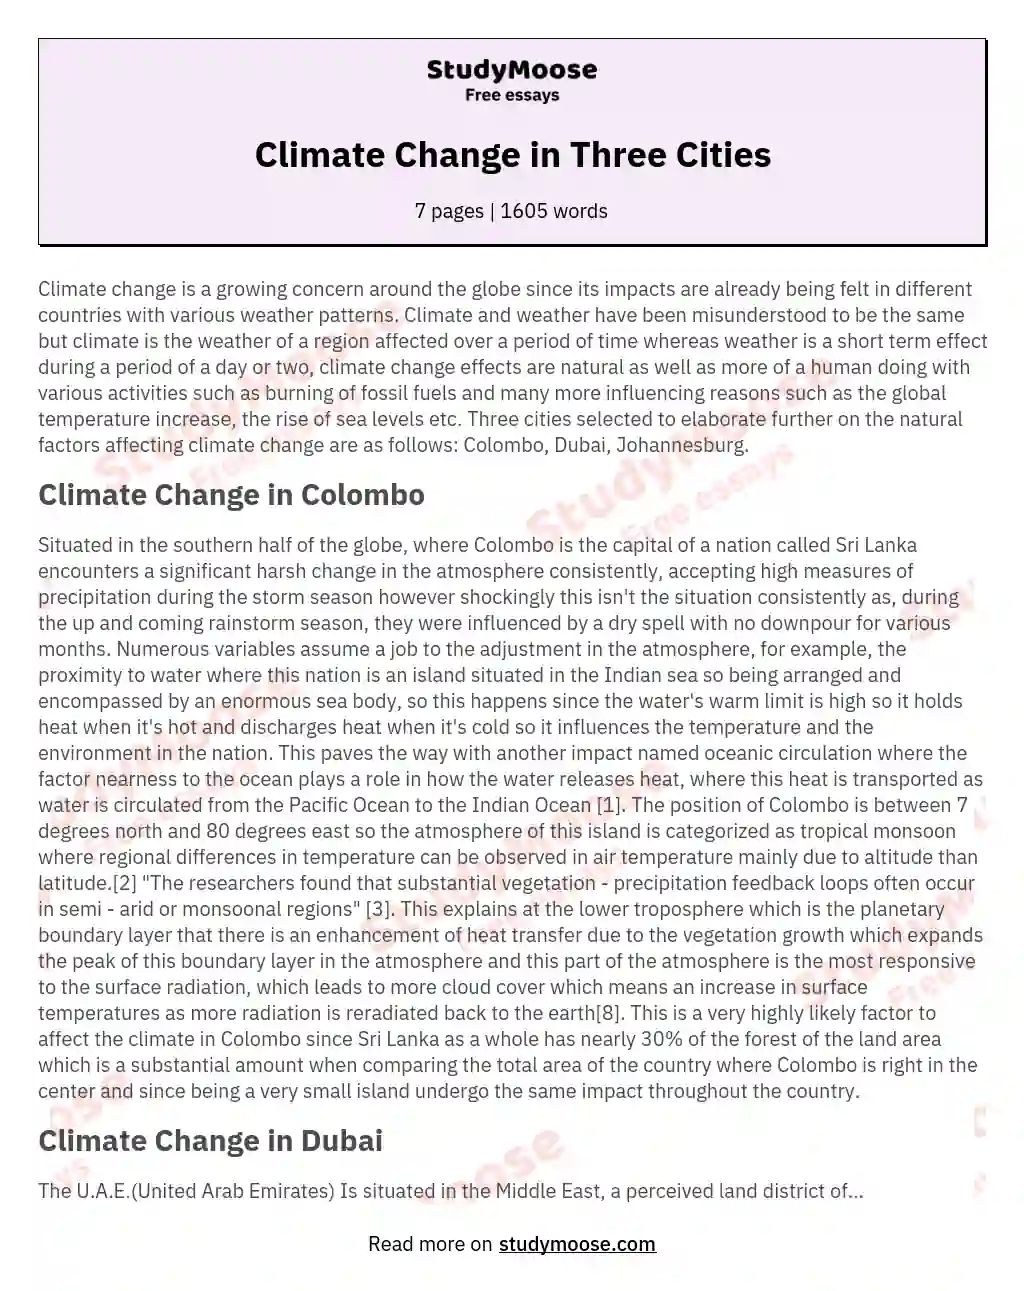 Climate Change in Three Cities essay